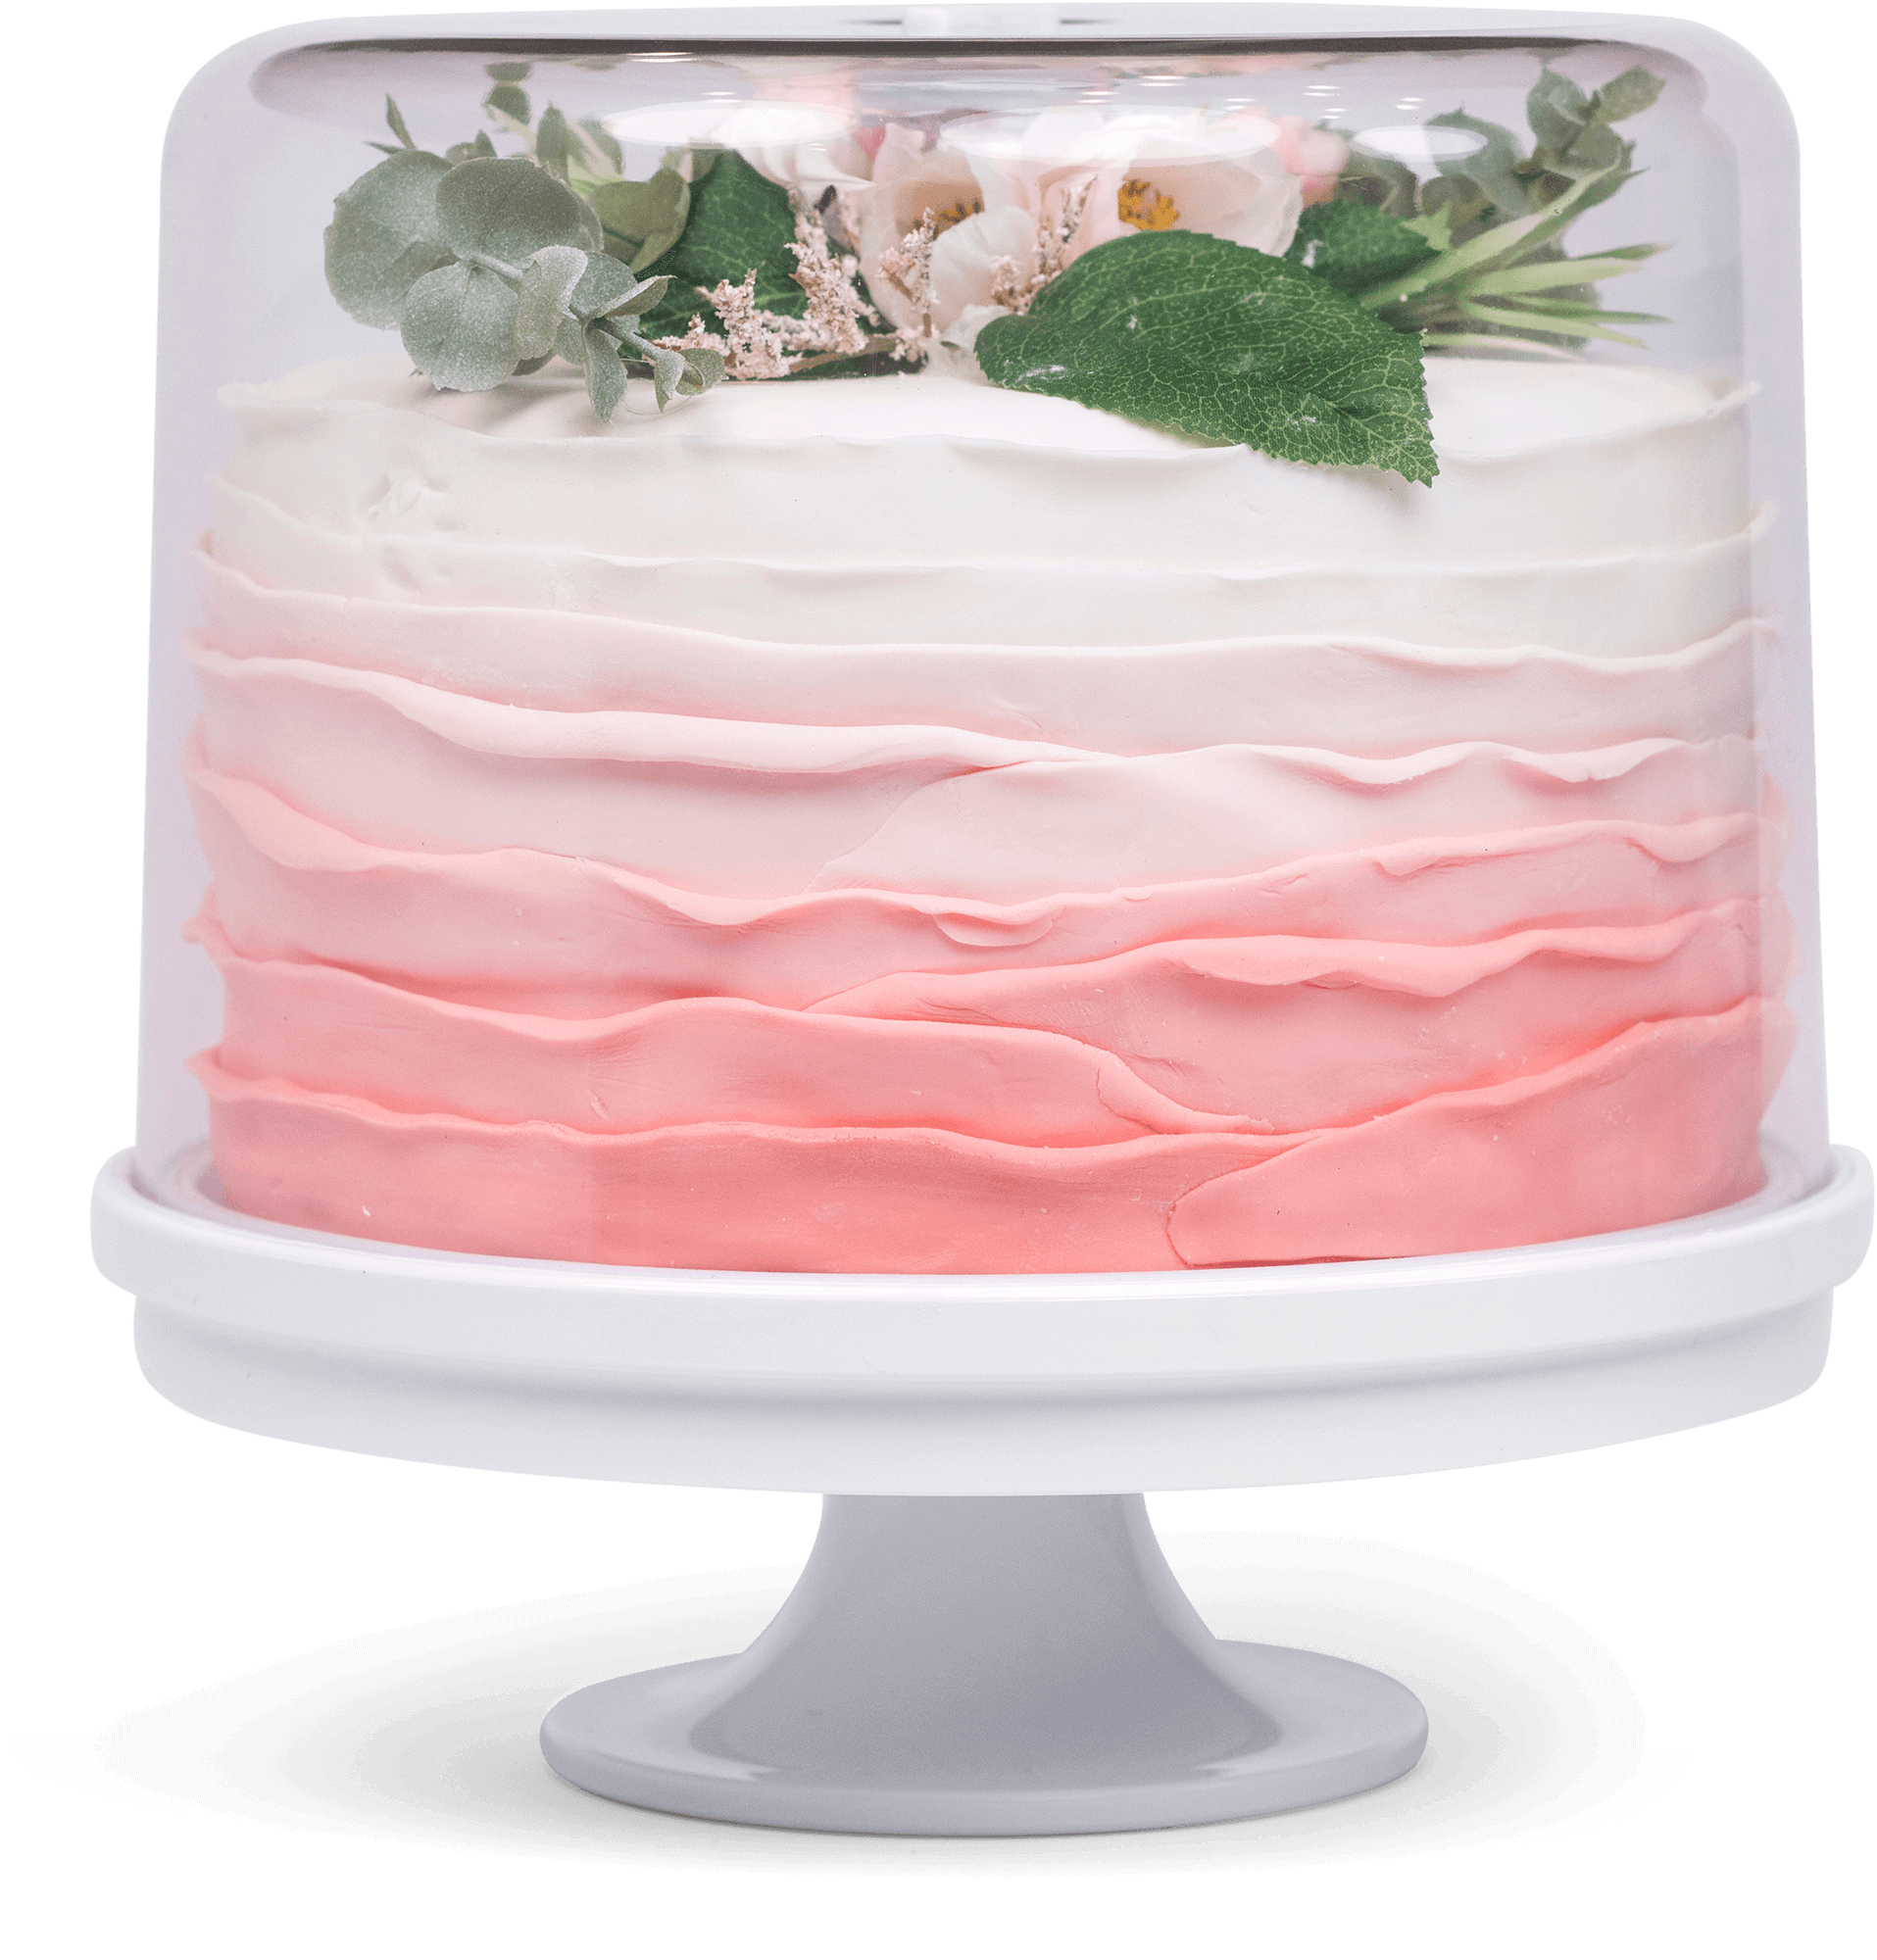 KeepCake covered on the included pedestal with a cake inside